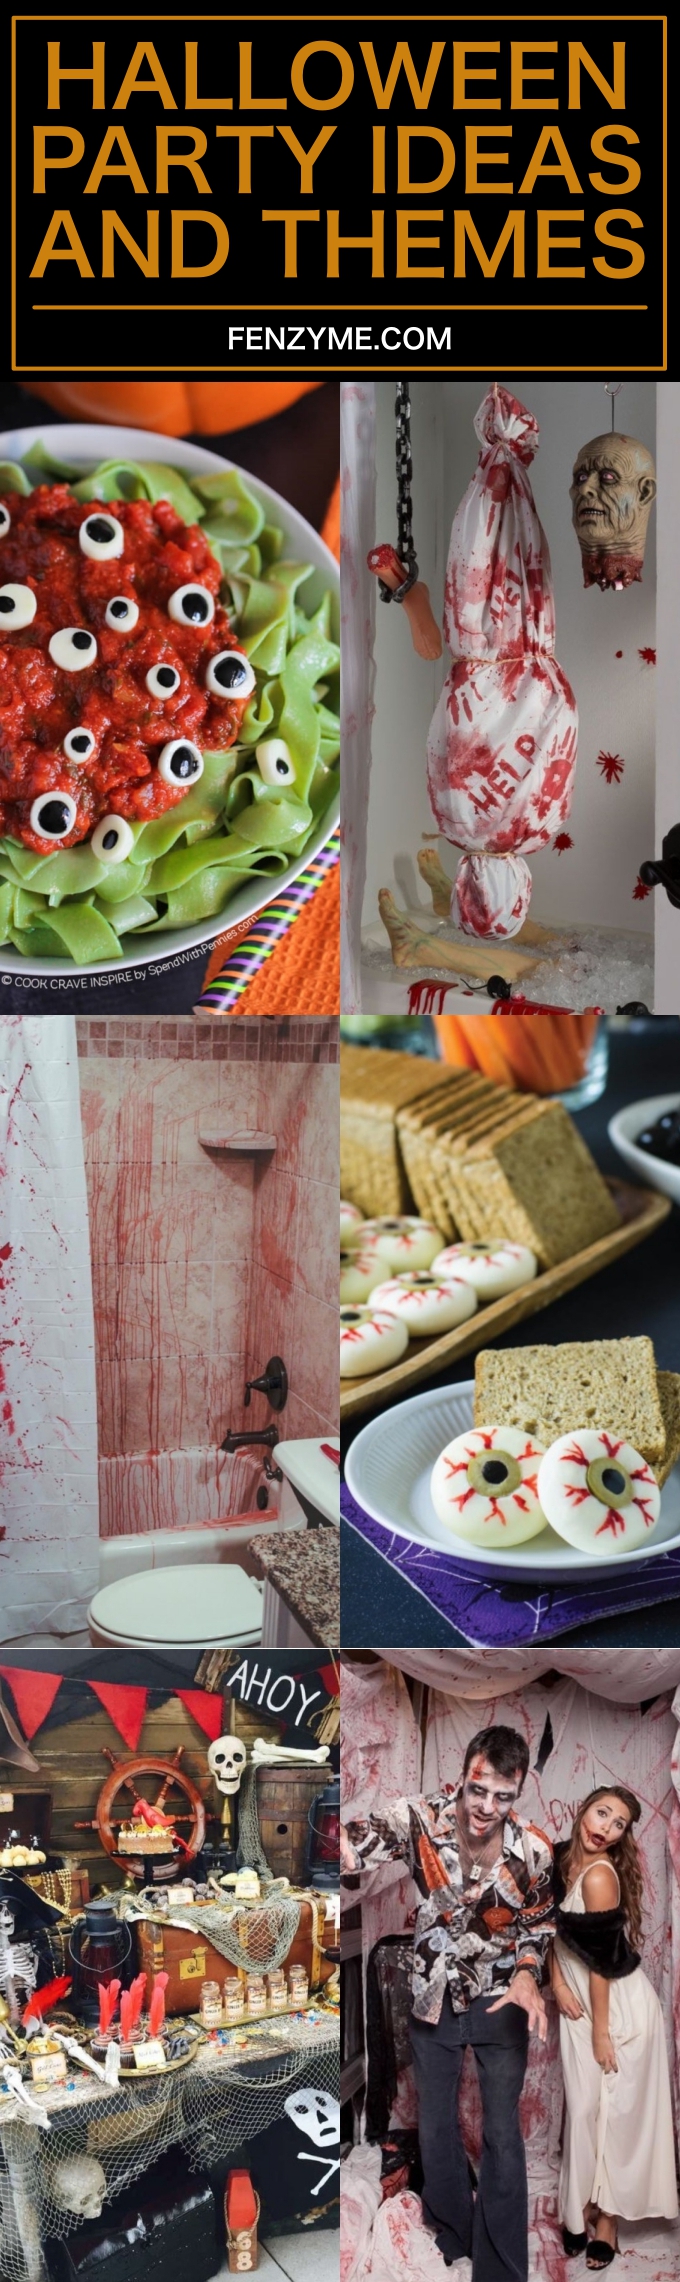 HALLOWEEN-PARTY-IDEAS-AND-THEMES